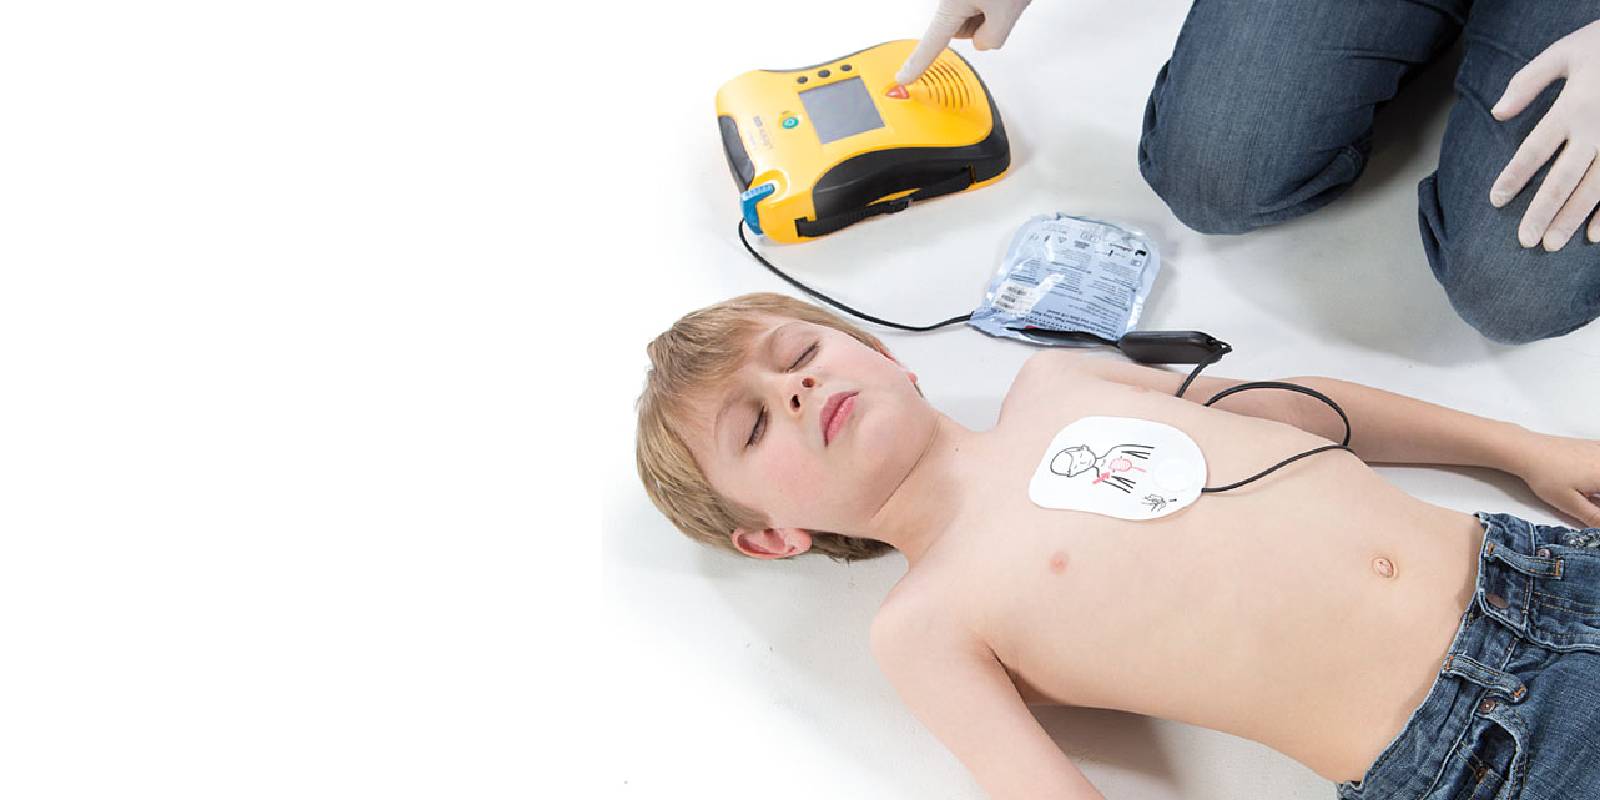 Life-Saving Techniques: Proper AED Pad Placement for Infants